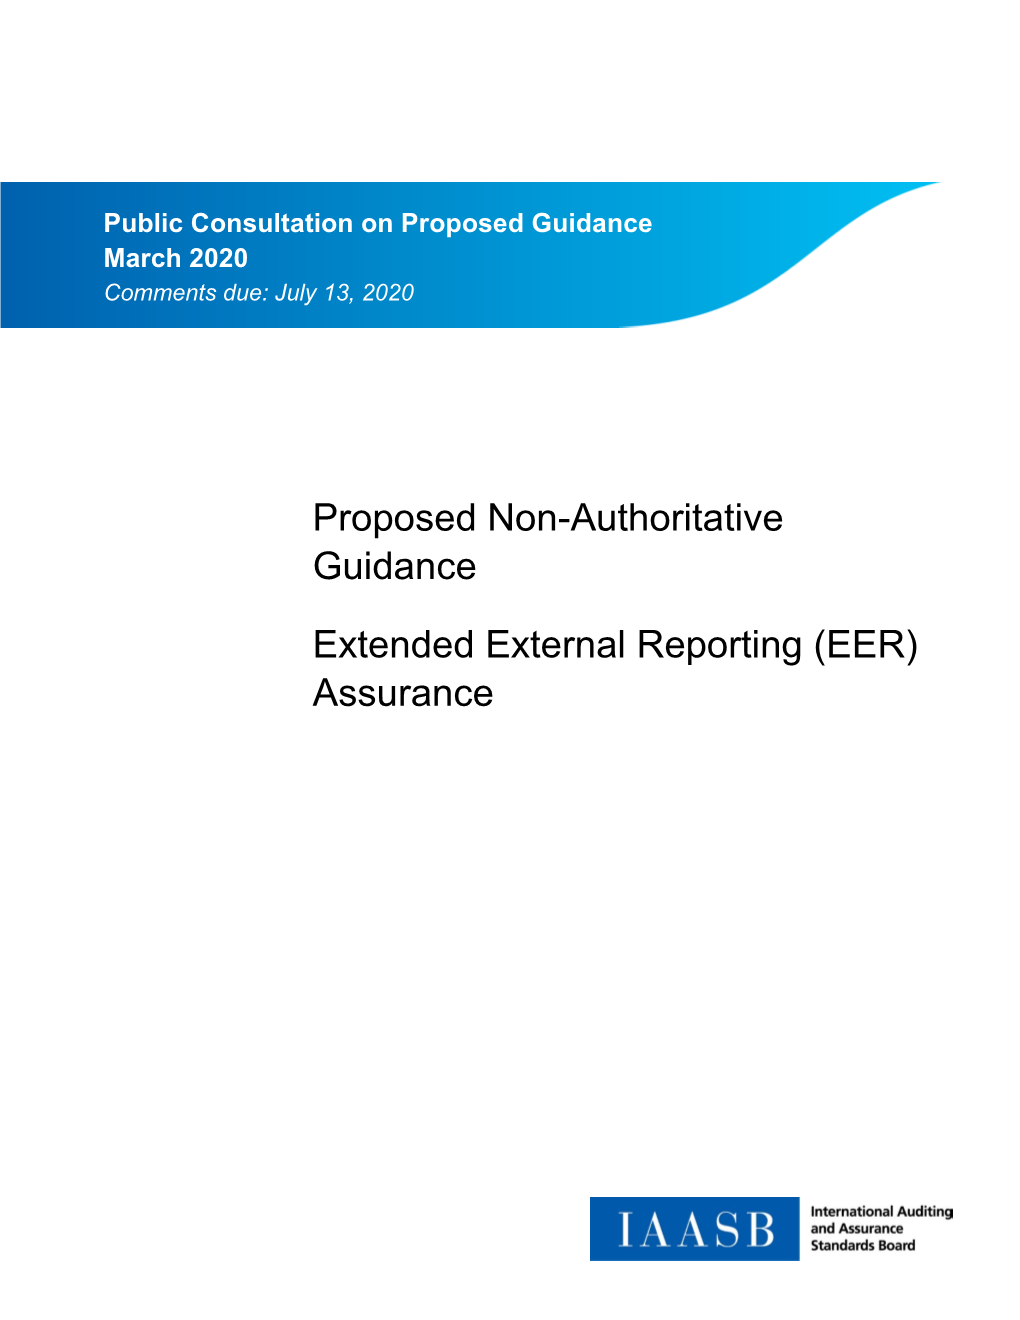 Proposed Non-Authoritative Guidance Extended External